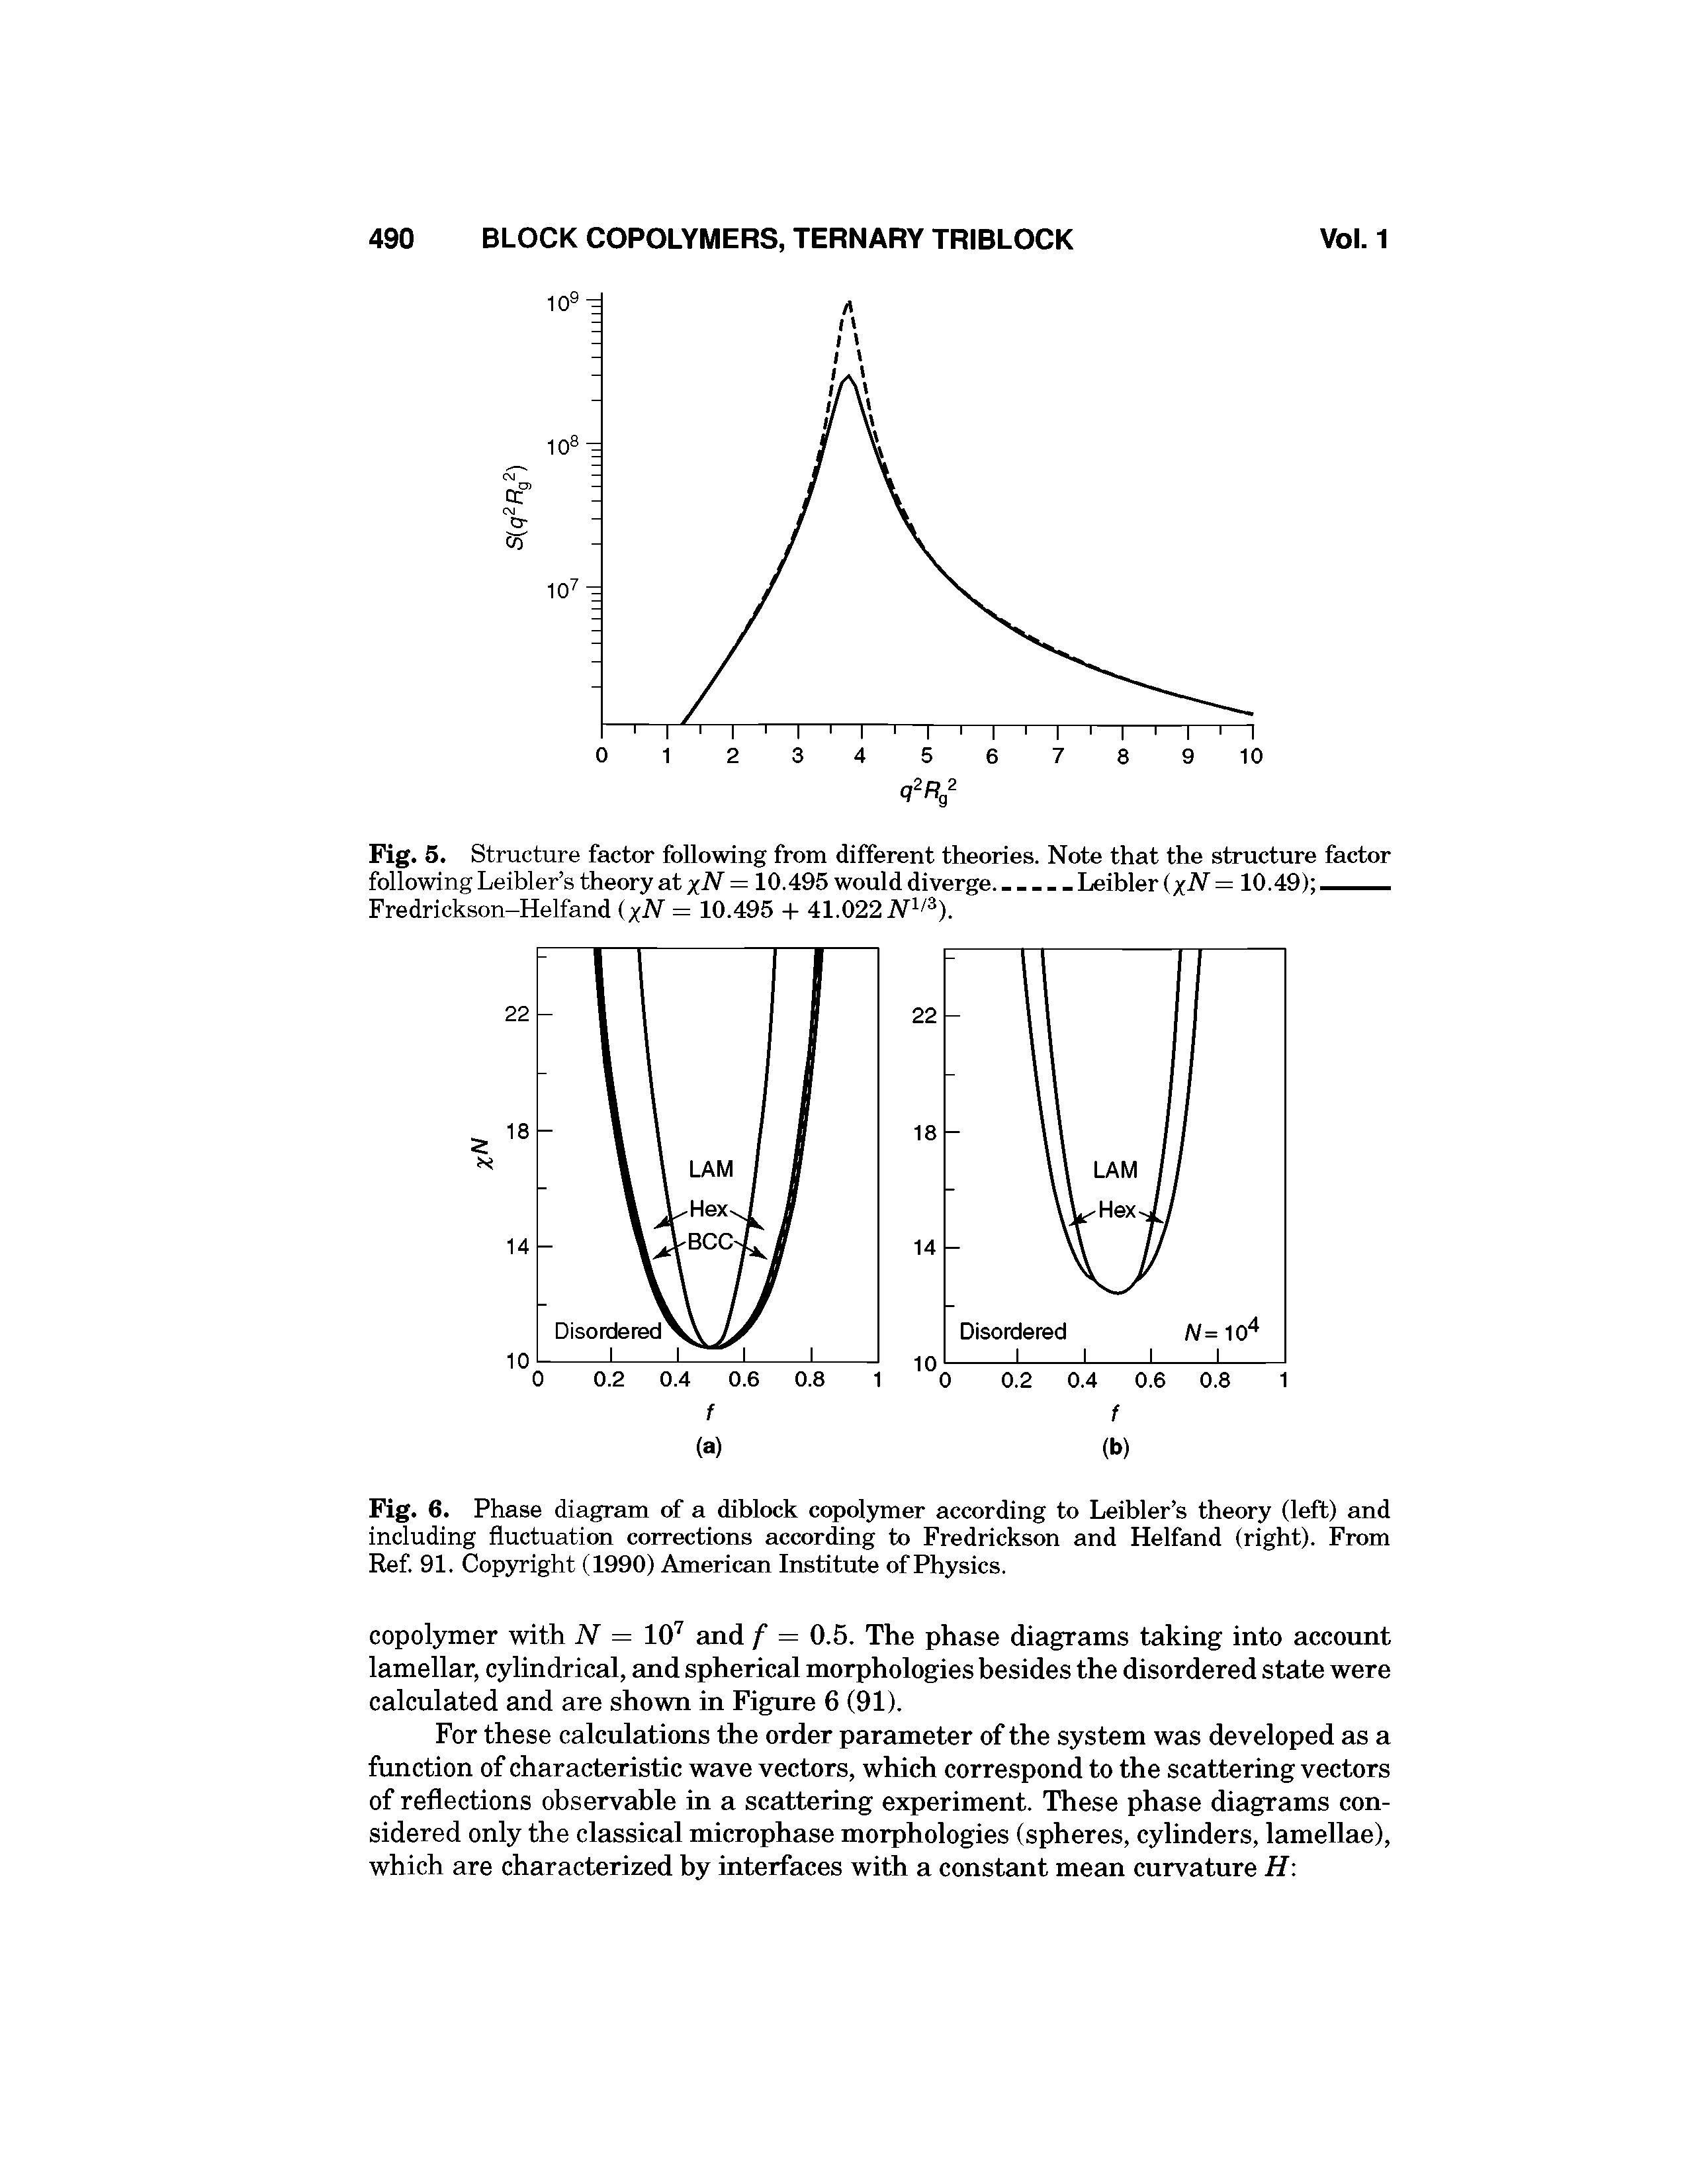 Fig. 6. Phase diagram of a diblock copolymer according to Leibler s theory (left) and including fluctuation corrections according to Fredrickson and Helfand (right). From Ref. 91. Copyright (1990) American Institute of Physics.